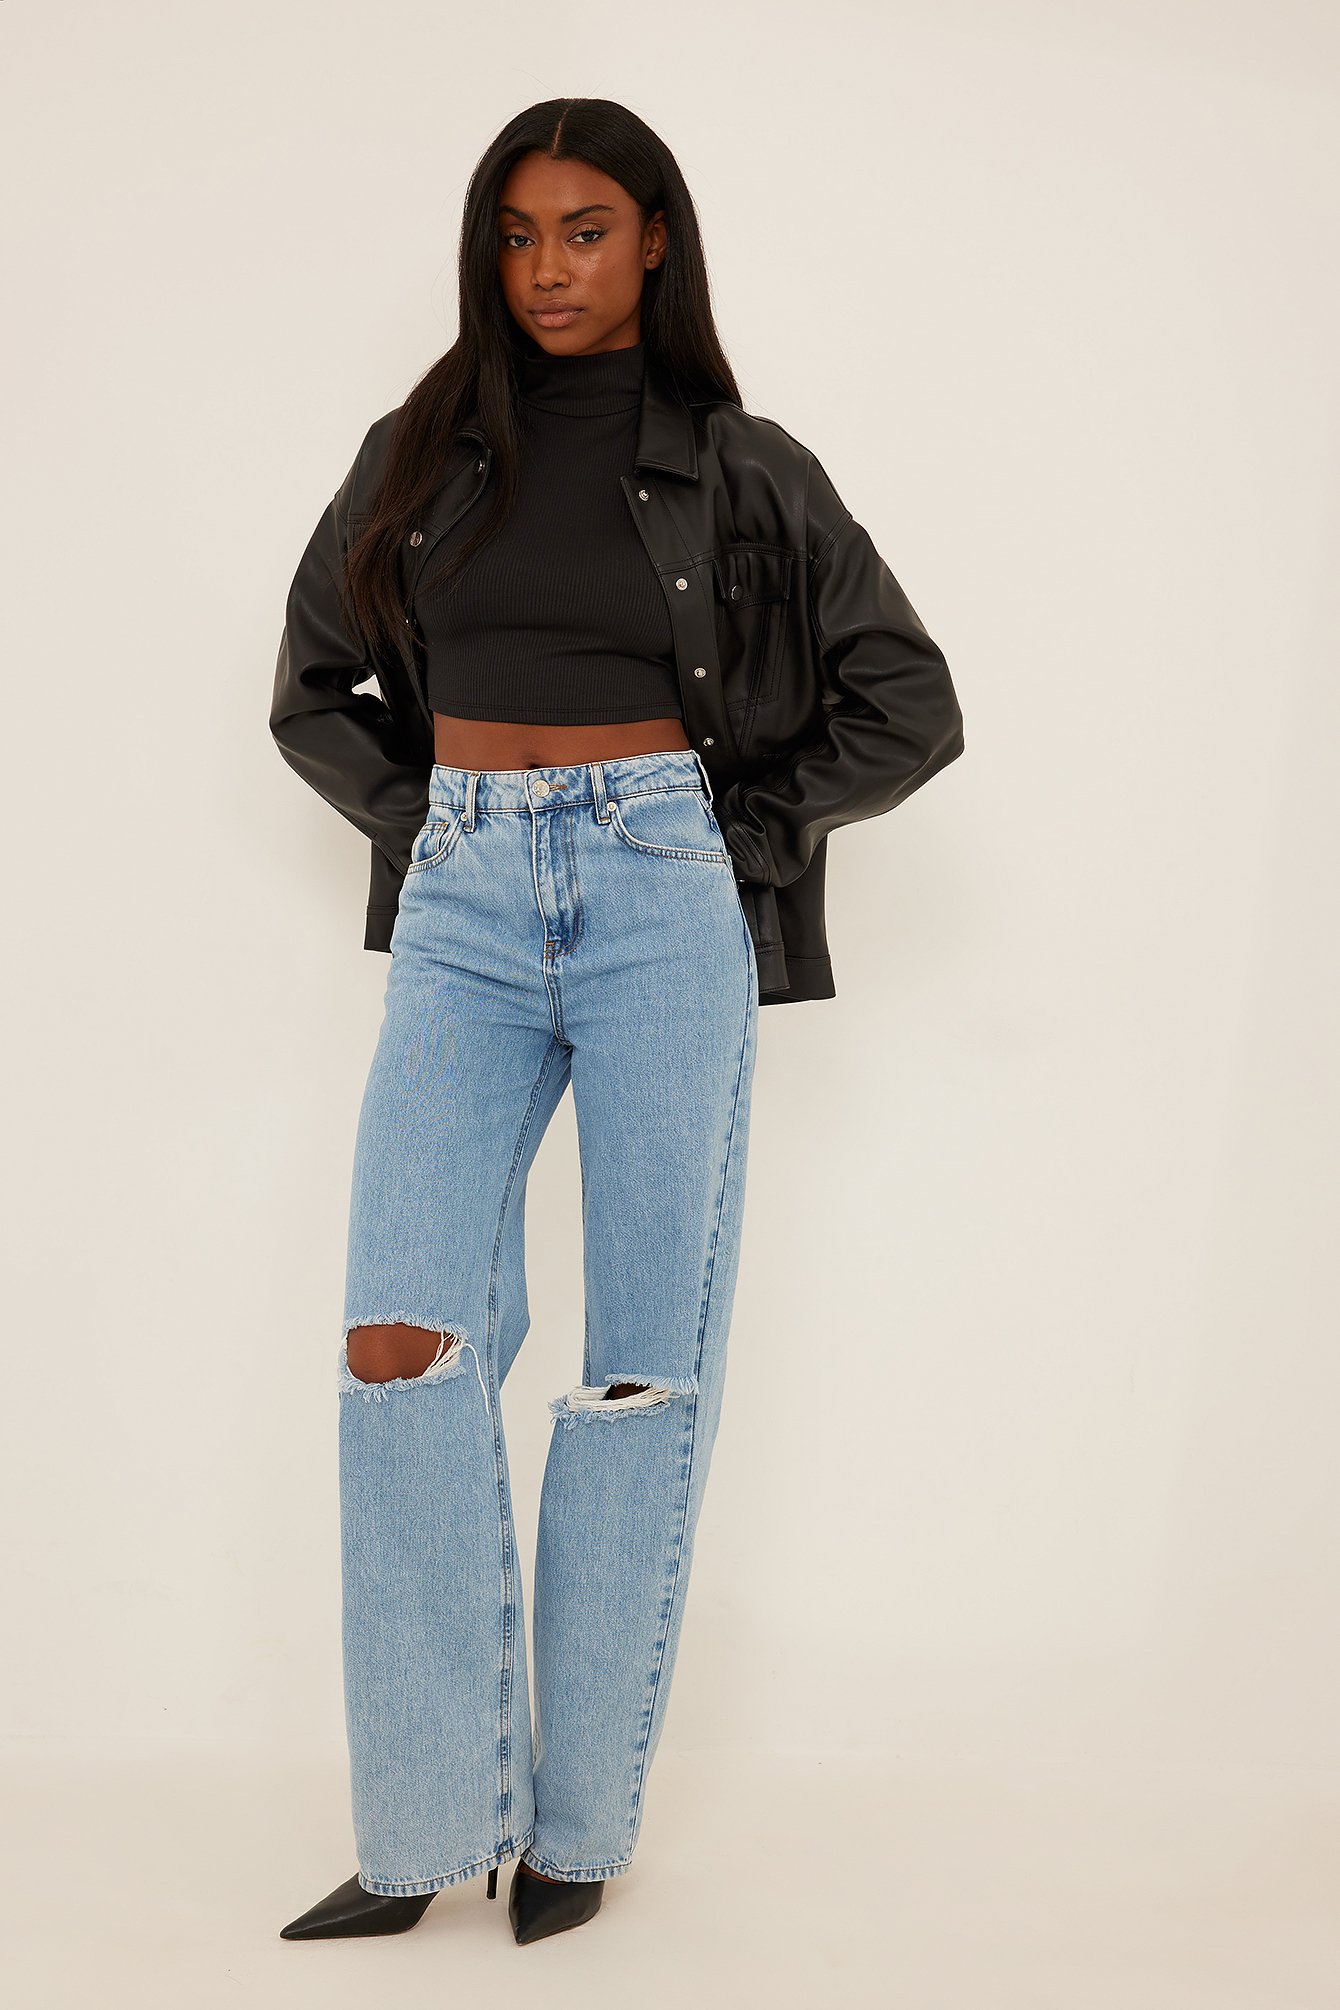 Ribbed Turtle Neck Crop Top Outfit.